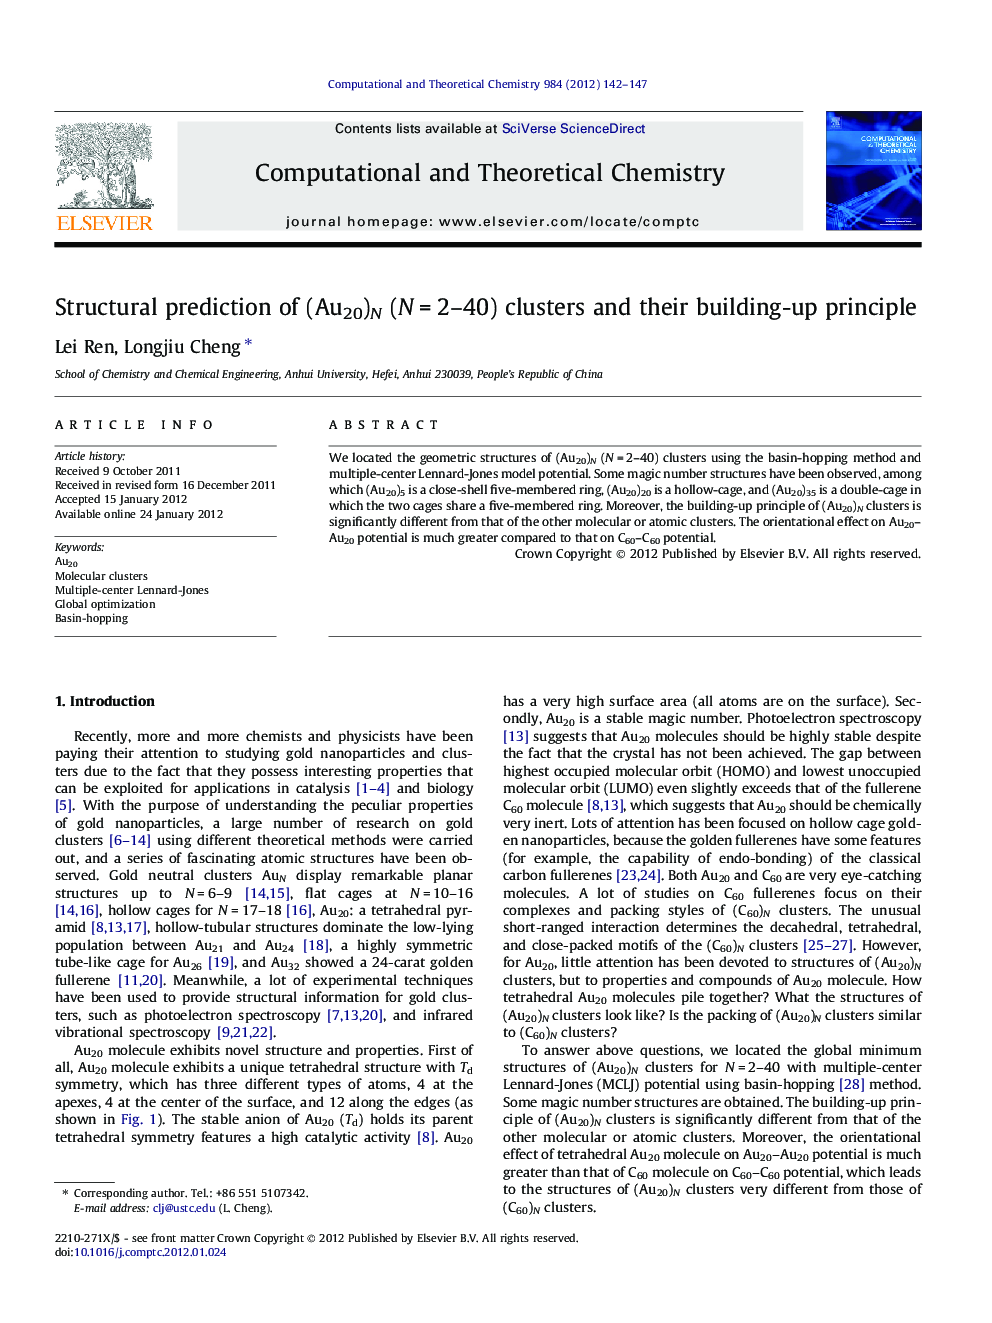 Structural prediction of (Au20)N (NÂ =Â 2-40) clusters and their building-up principle